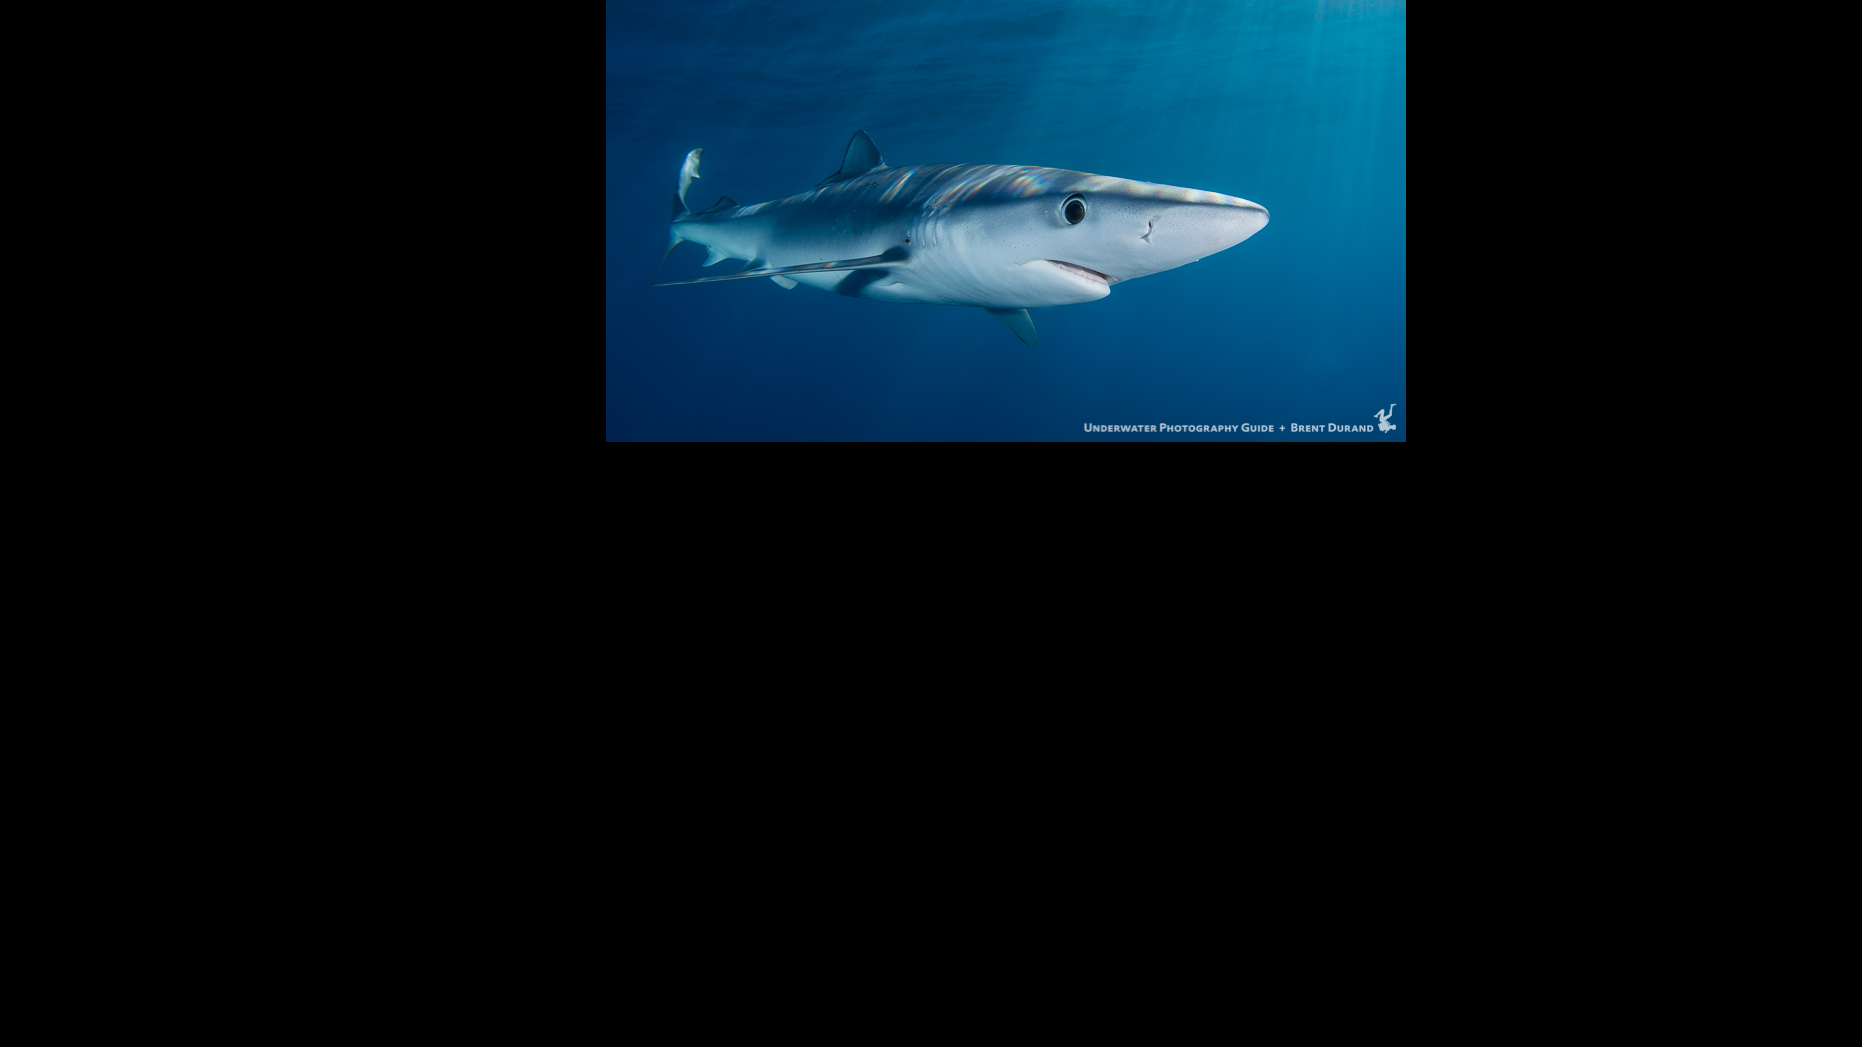 Aligned Image of Shark in Space